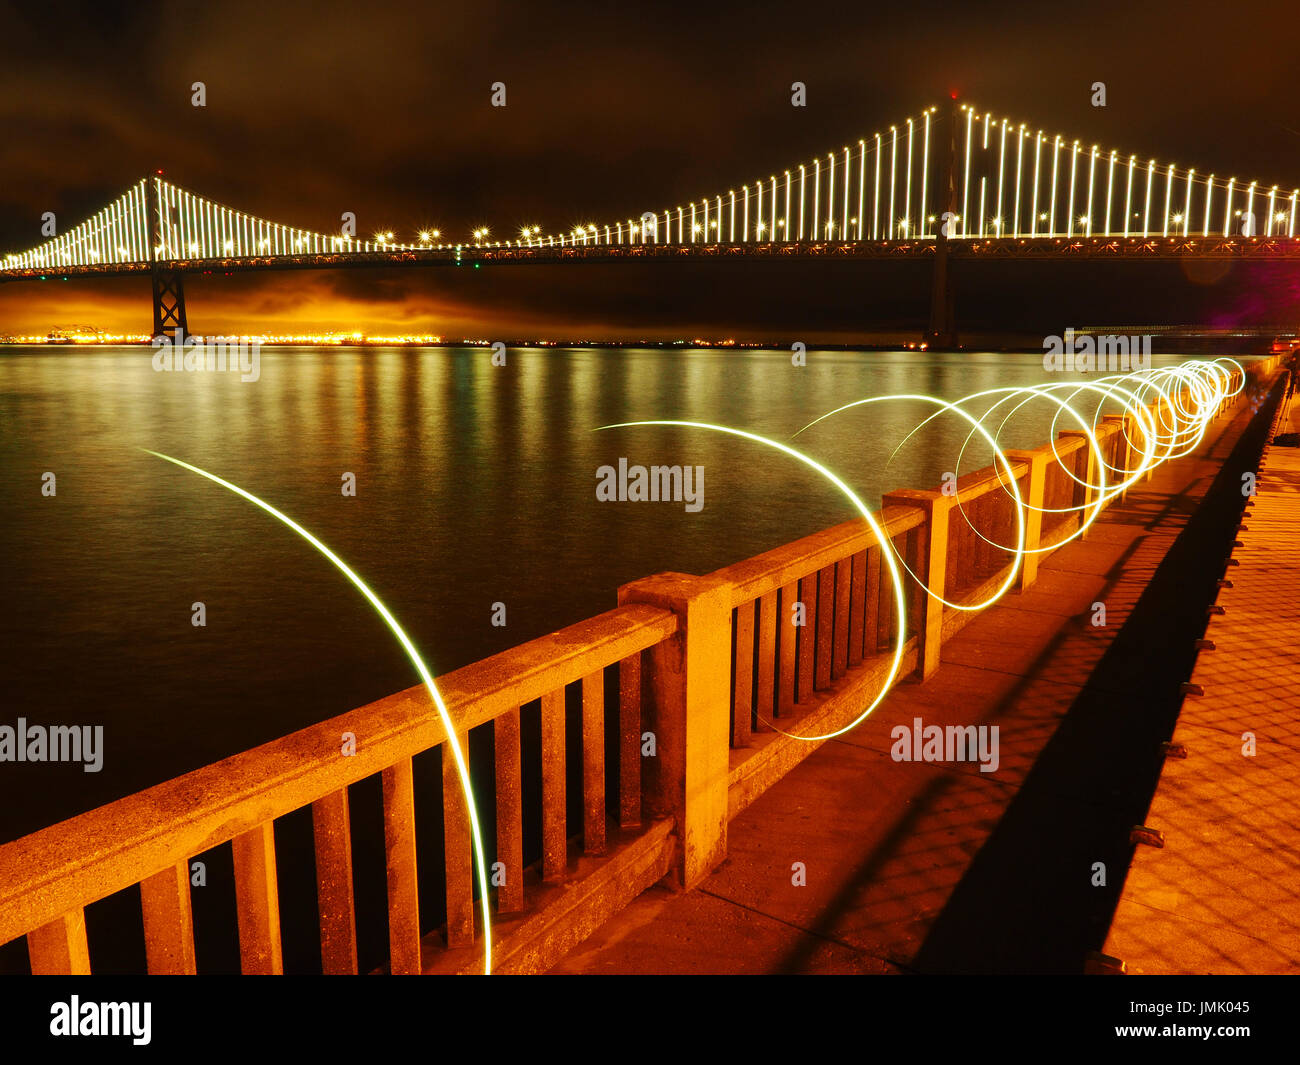 New Bay Bridge at Night as Seen from the Embarcadero in San Francisco, California with Circular Light Painting in the Foreground Stock Photo